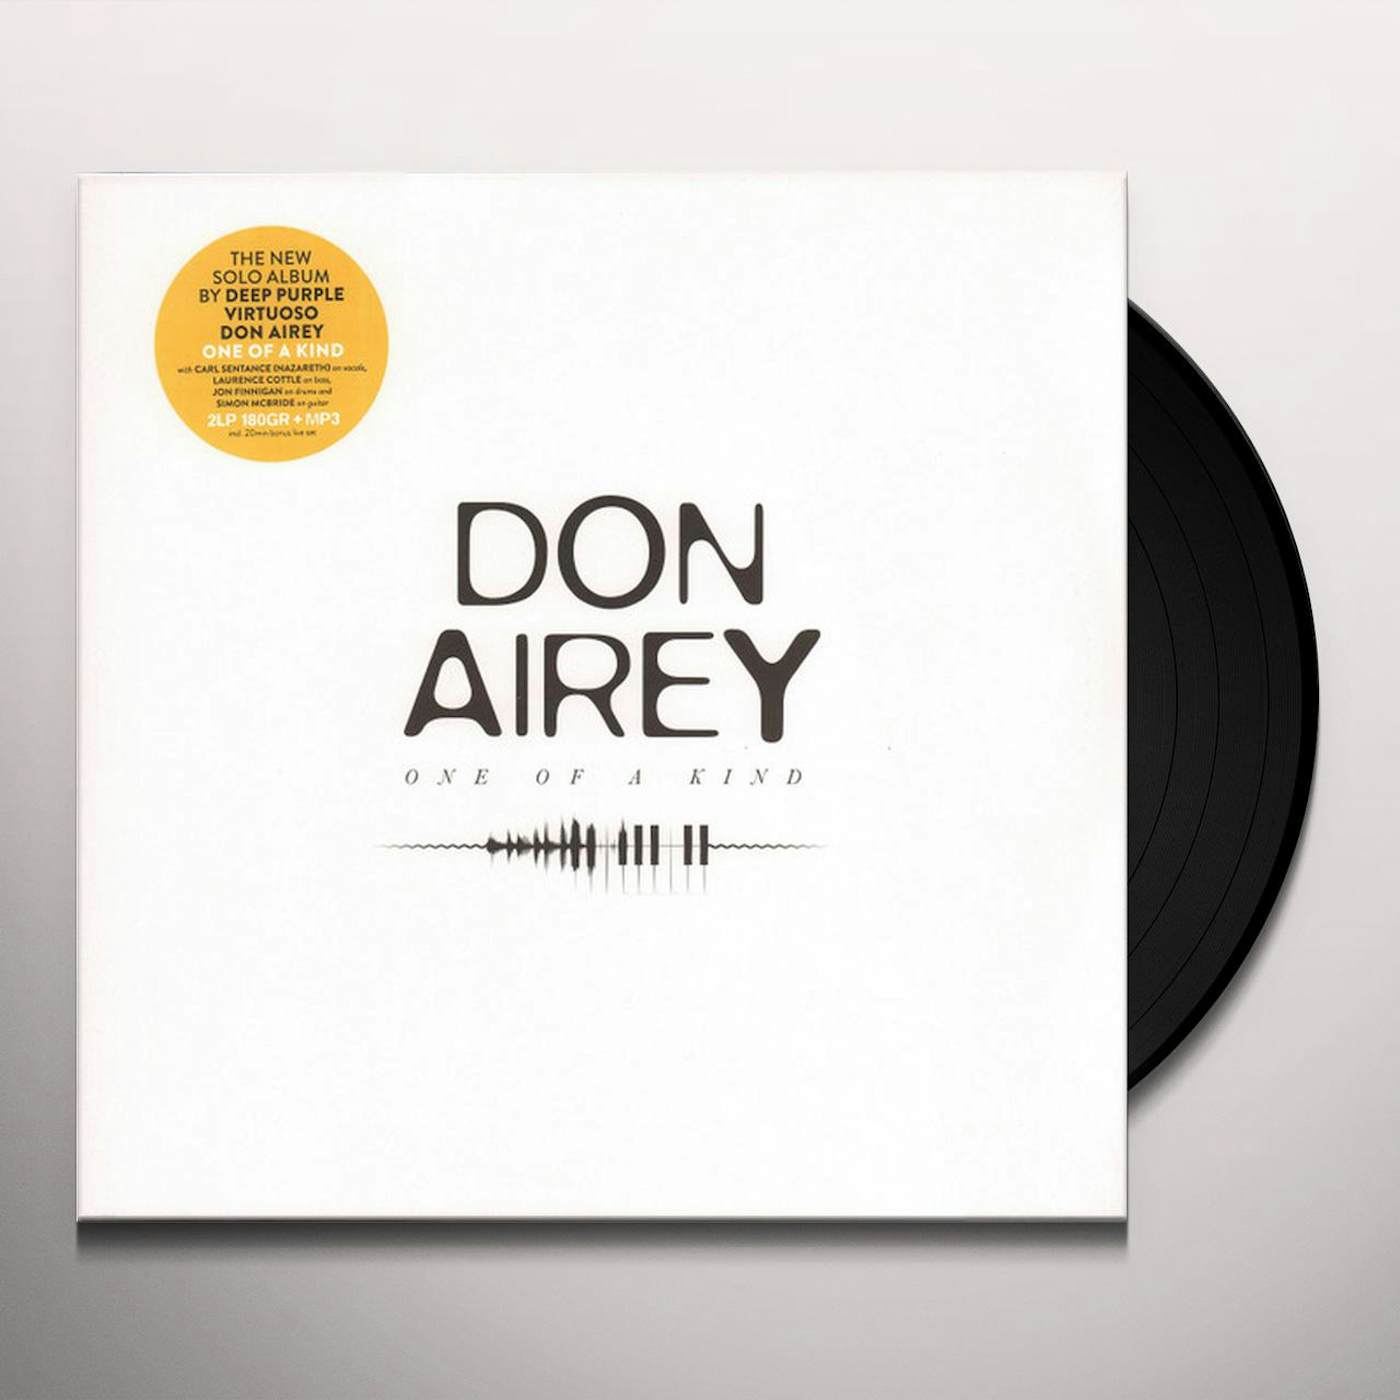 Don Airey One of a Kind Vinyl Record